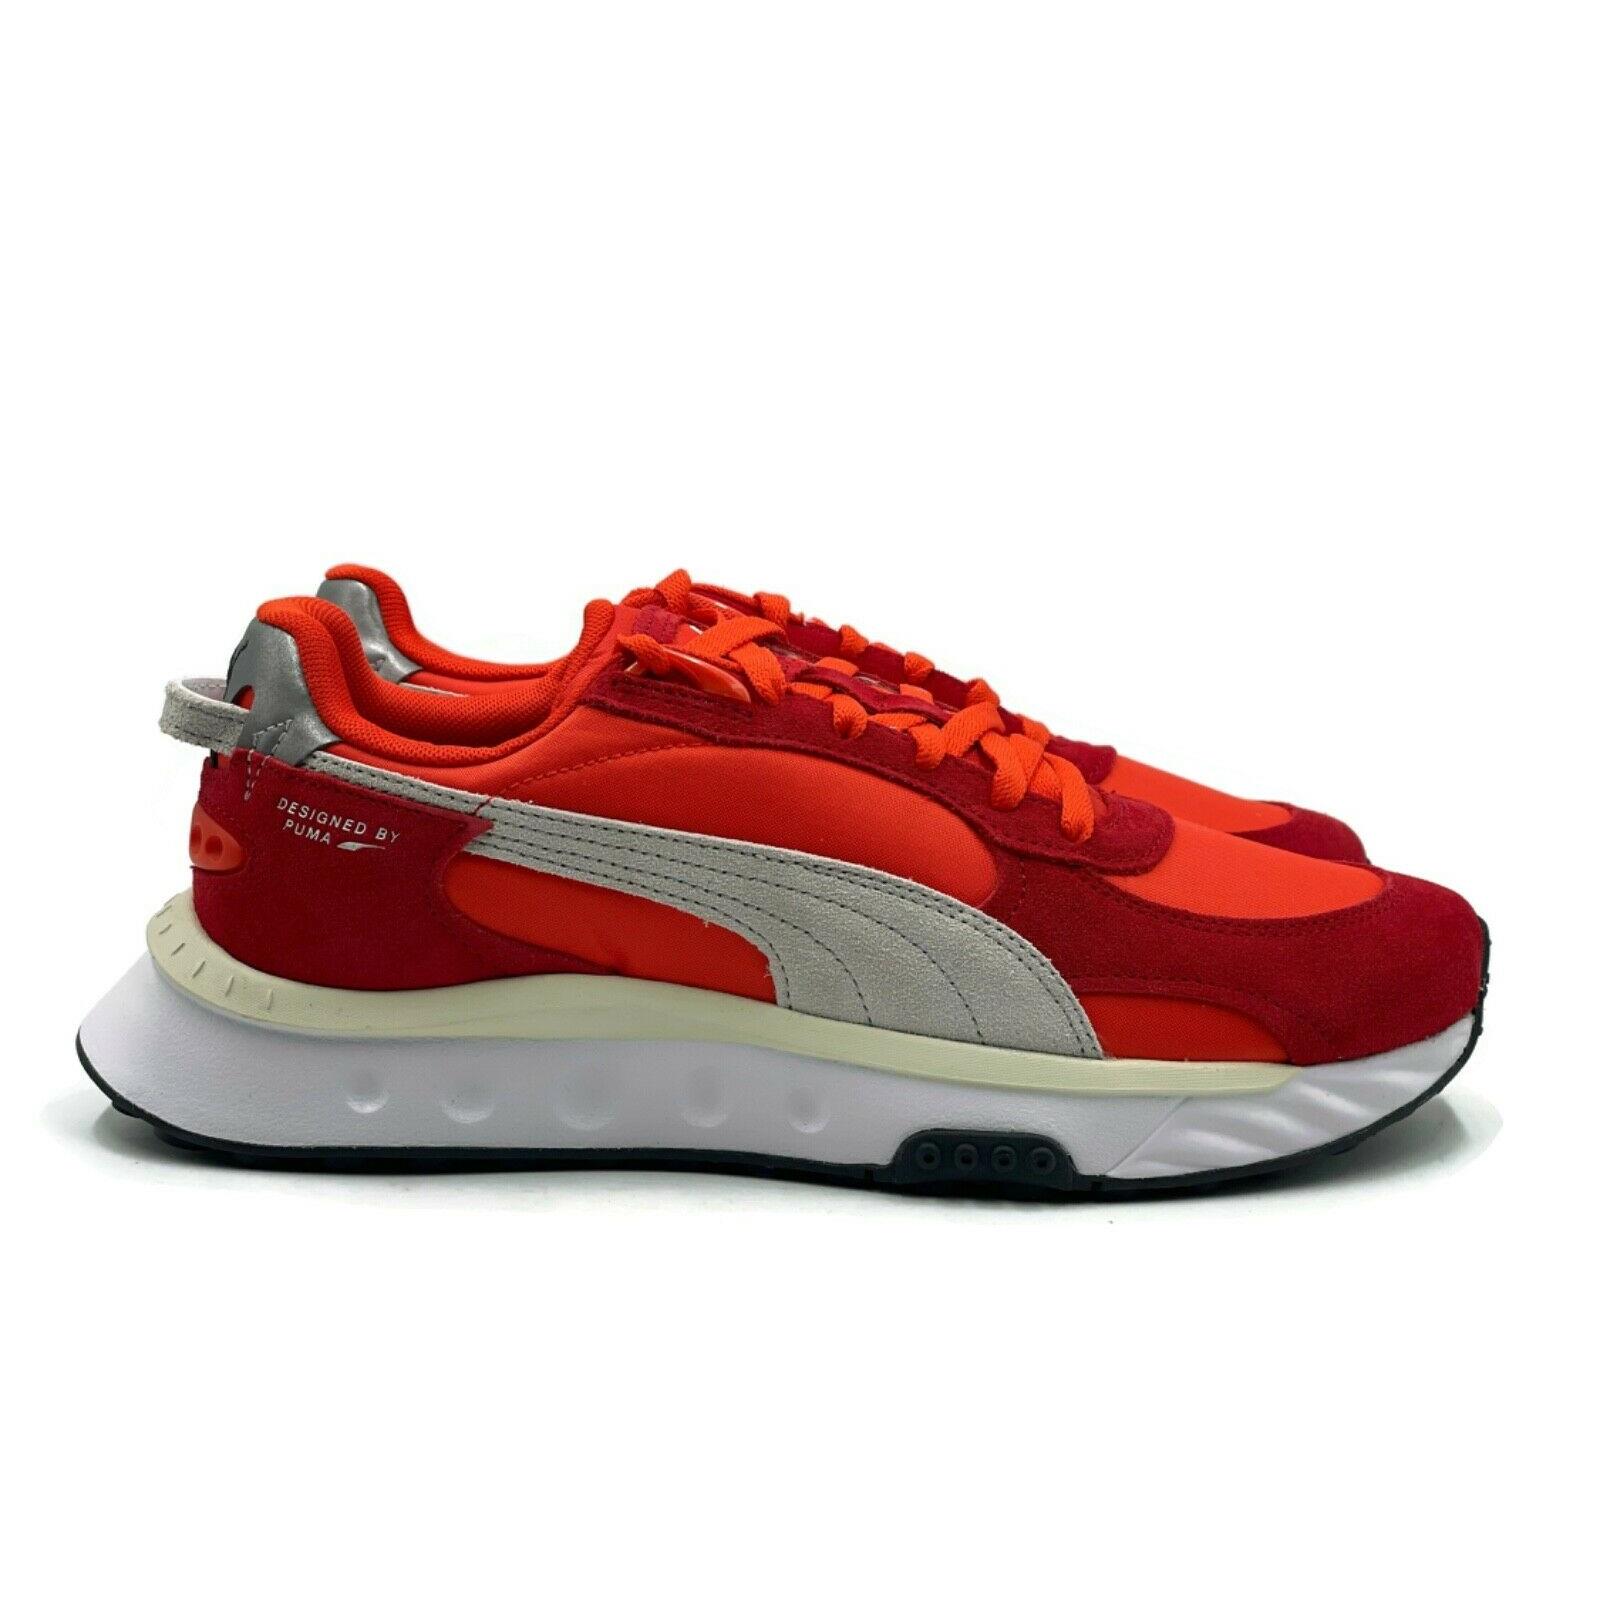 Puma Wild Rider Pickup Mens Size 10.5 Casual Shoe Red Athletic Trainer Sneaker